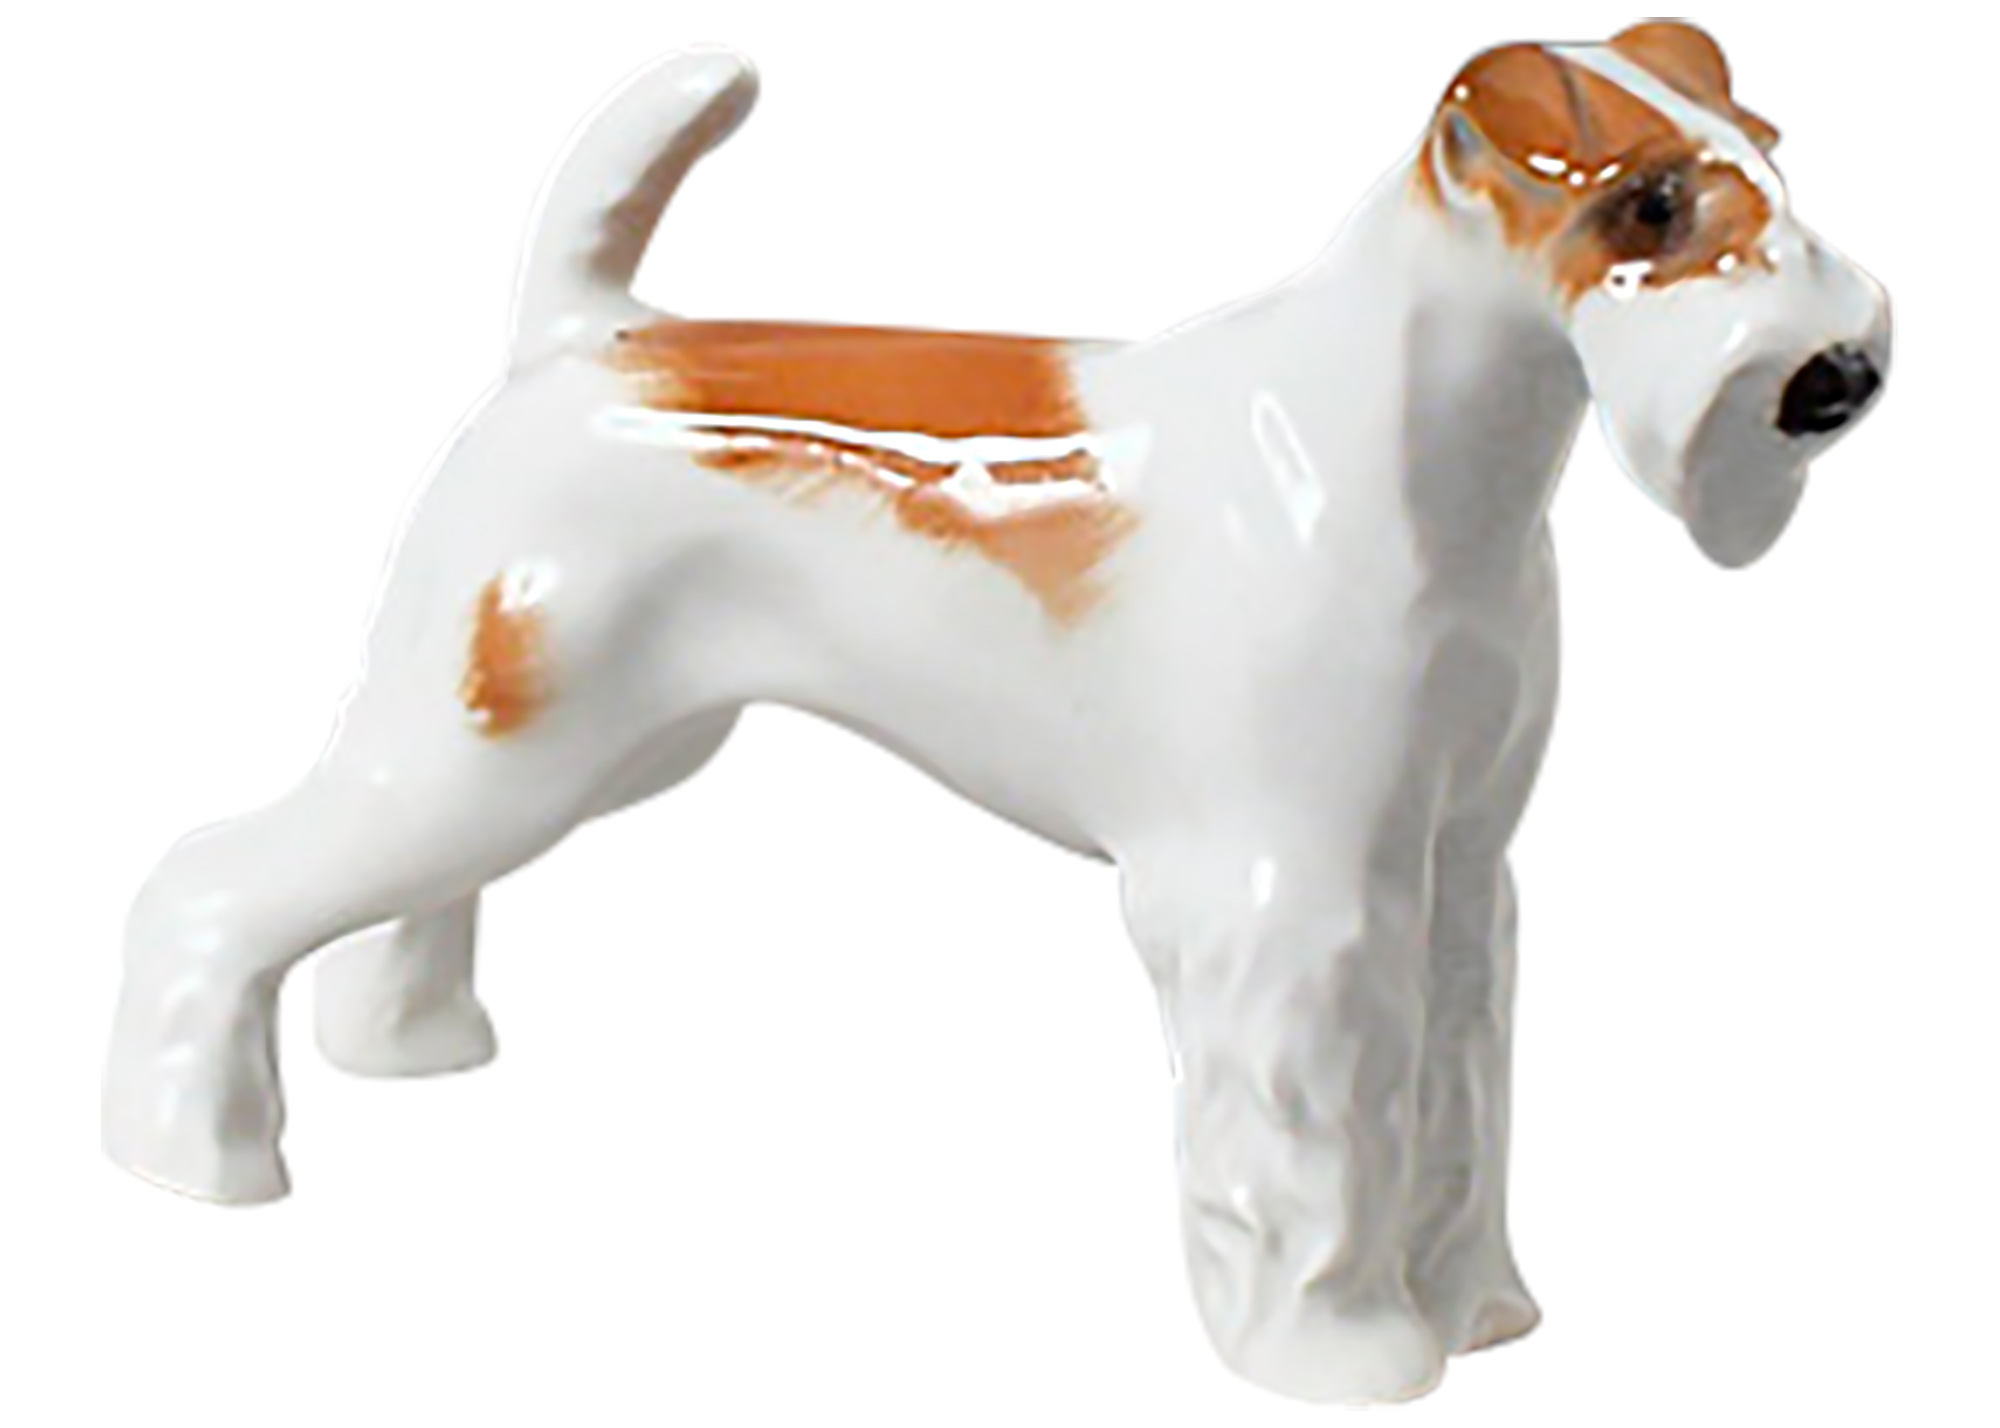 Buy Small Coarsehaired Terrier Dog Figurine at GoldenCockerel.com